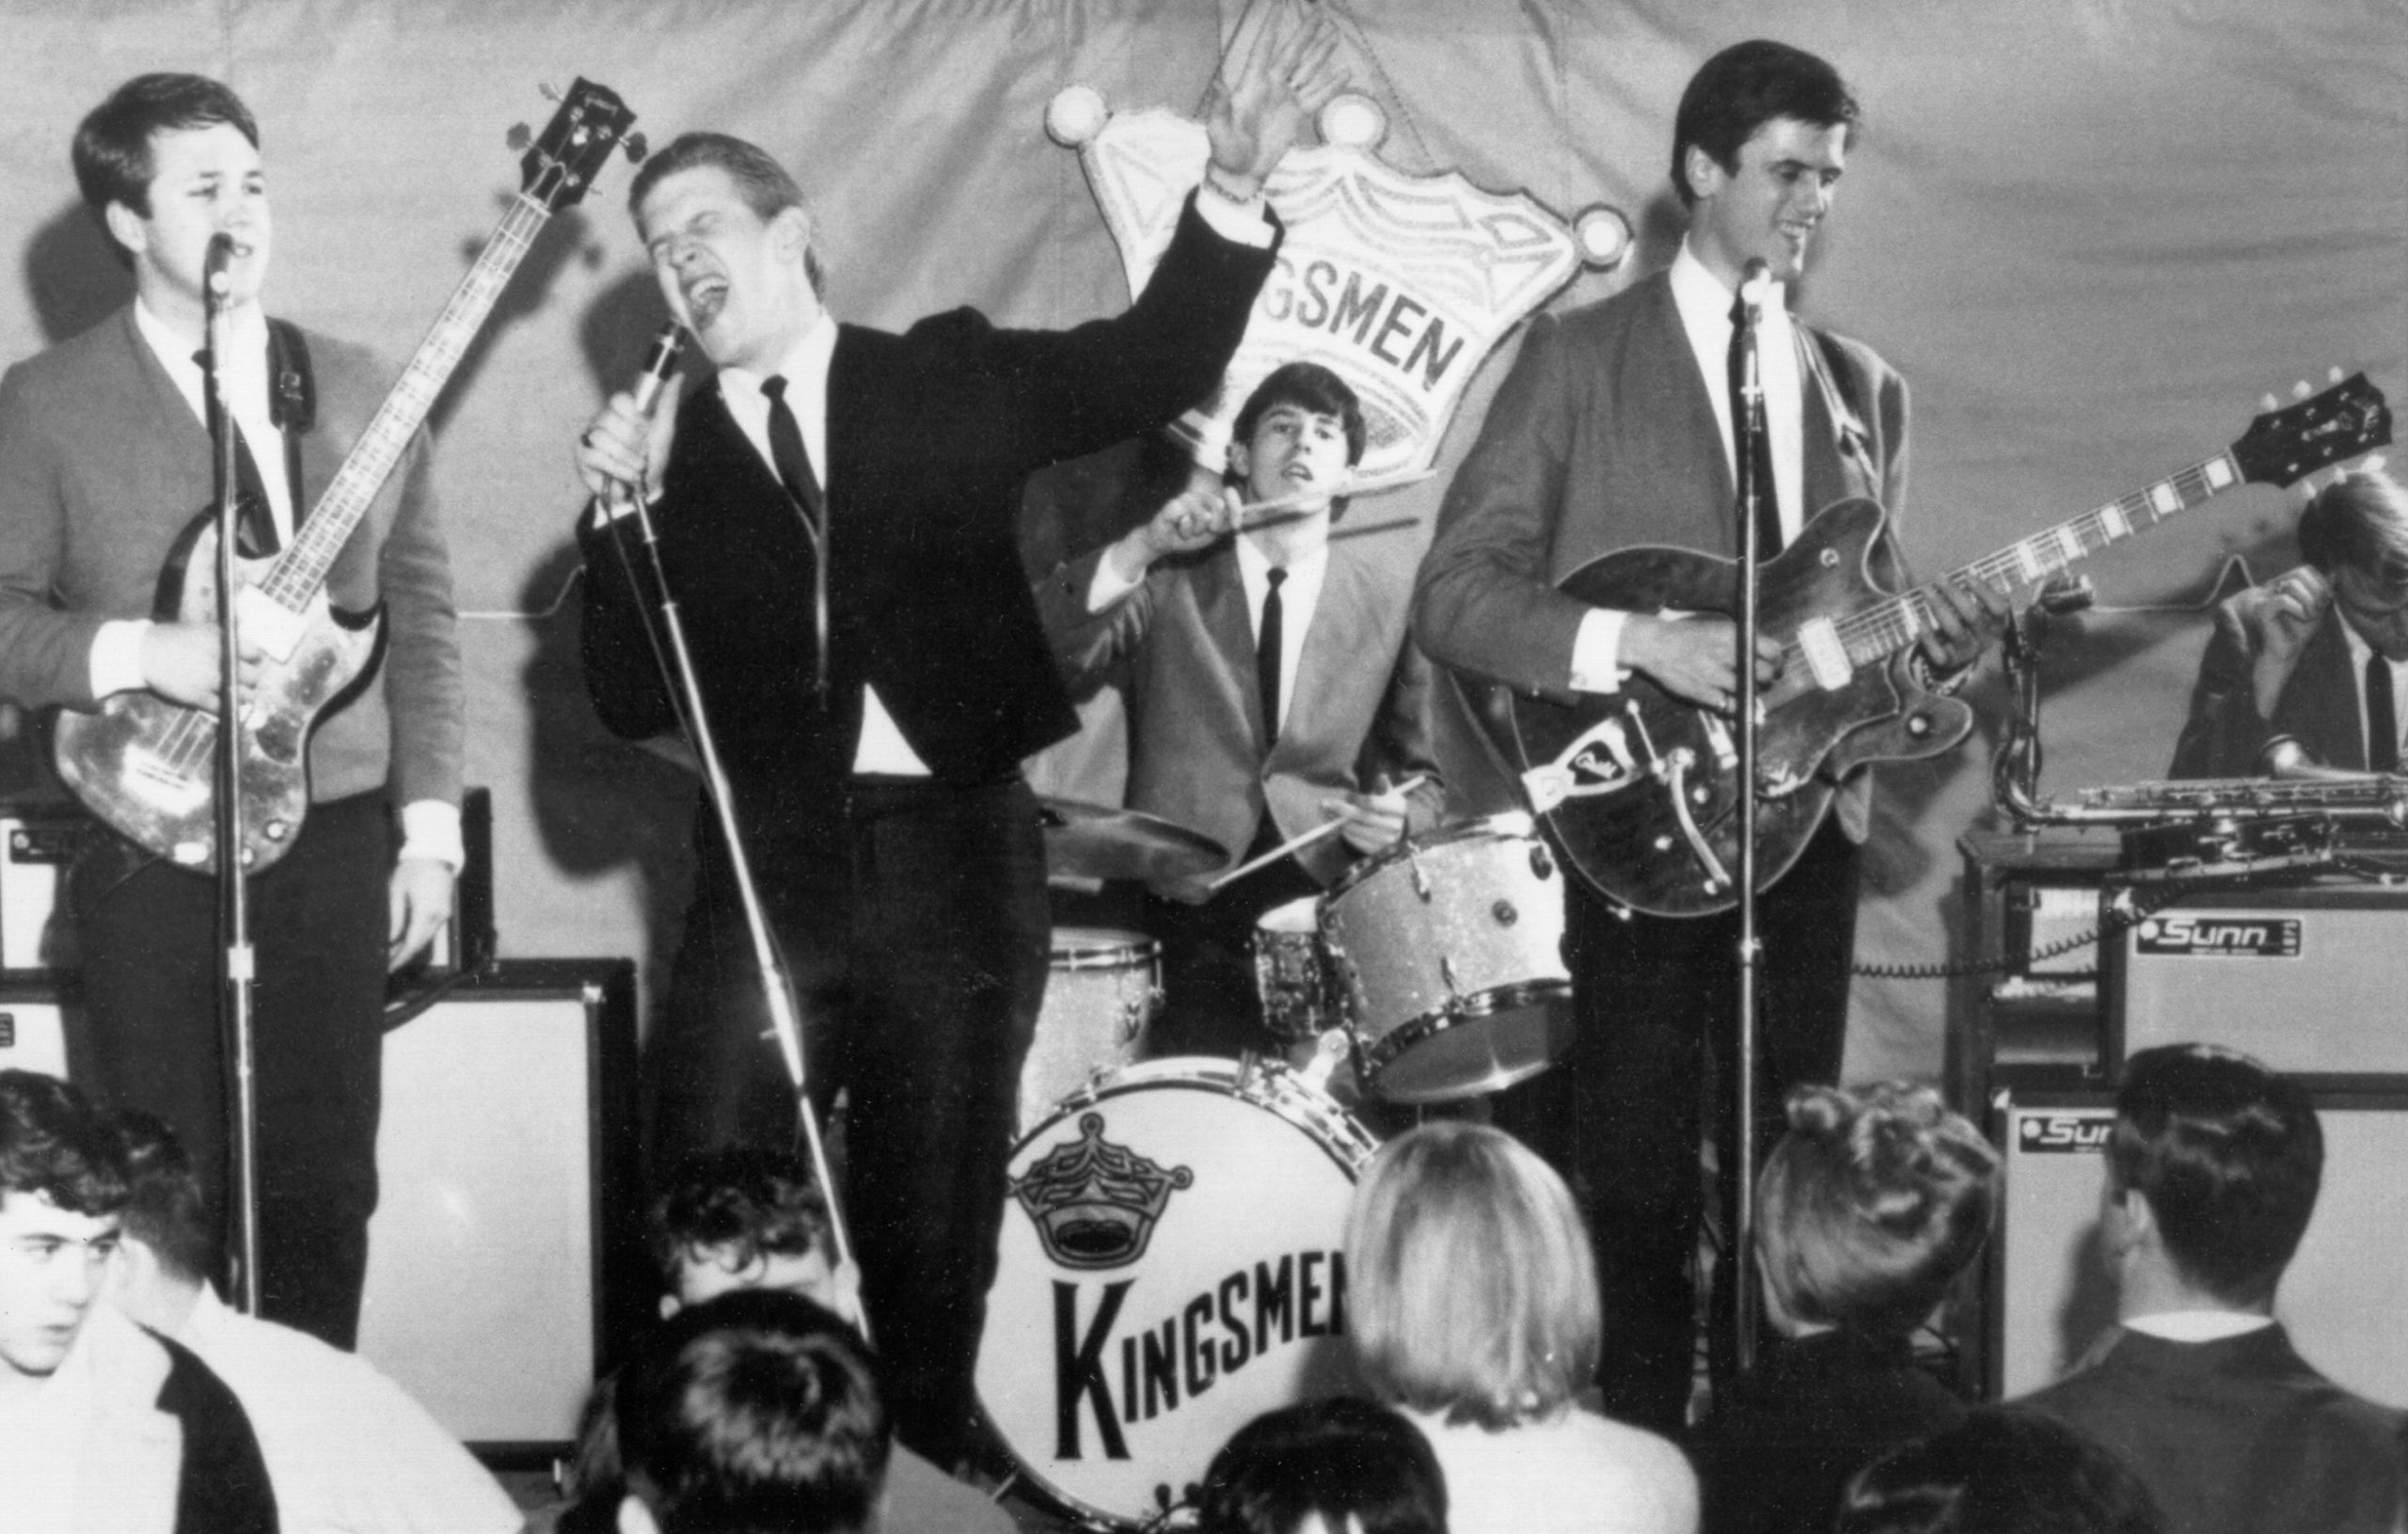 CIRCA 1964:  (L-R) Norm Sundholm, Lynn Easton, Dick Peterson, Mike Mitchell, and Barry Curtis of the touring version of the rock and roll band "The Kingsmen" perform onstage in 1964. (Photo by Michael Ochs Archives/Getty Images)